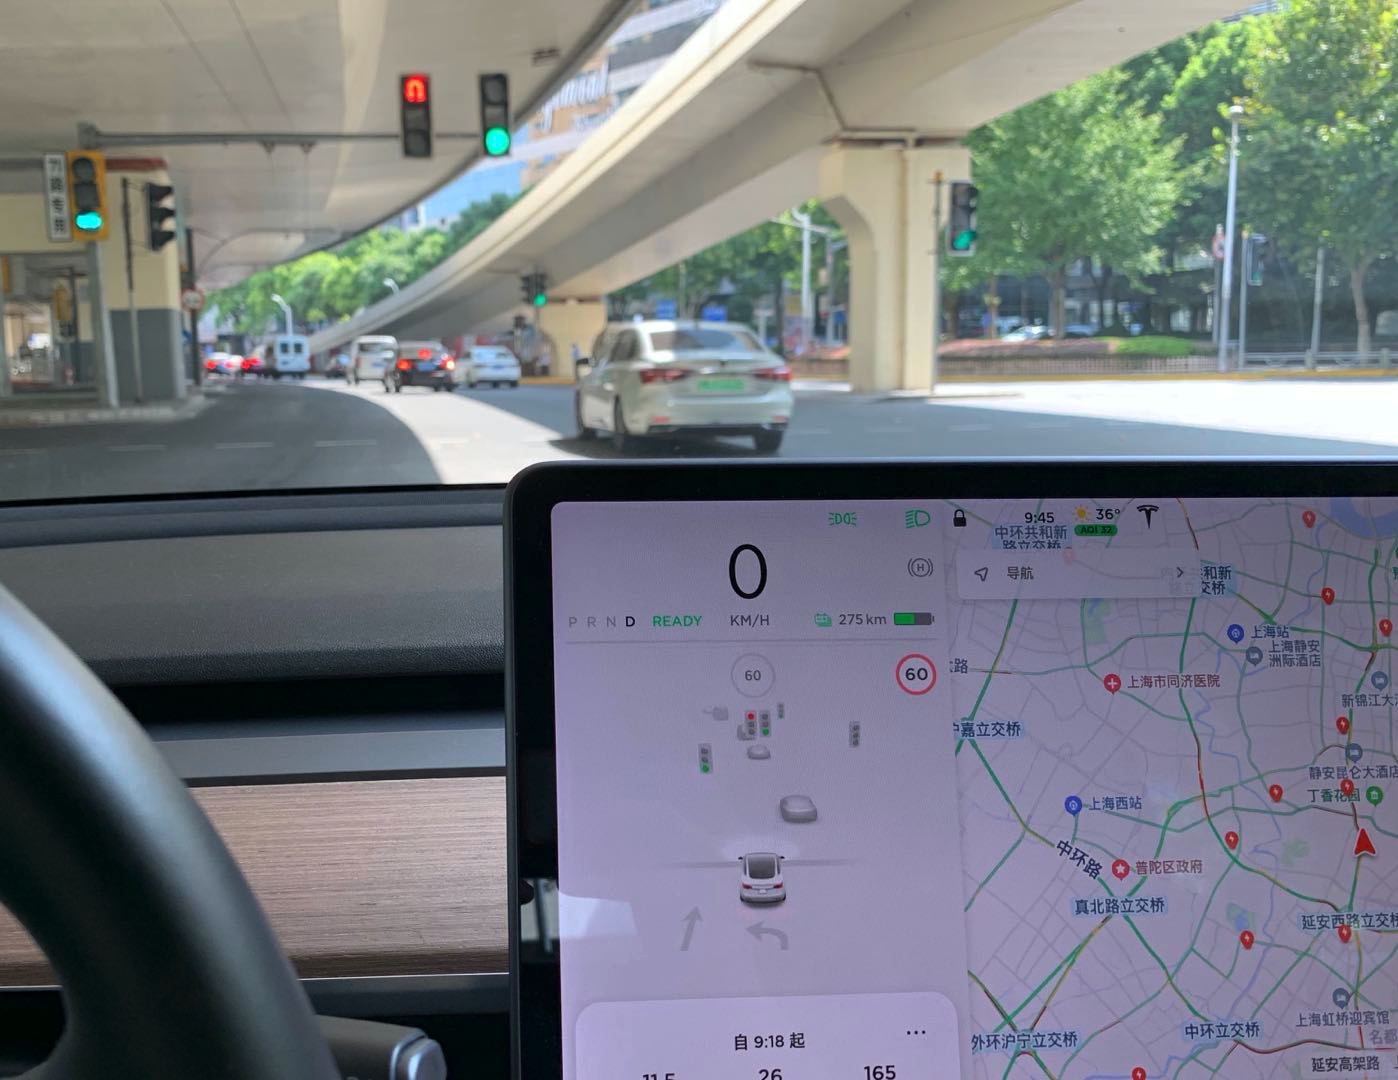 Tesla has released version 2020.36 software in North America, which can automatically adjust the vehicle speed based on speed limit signs.